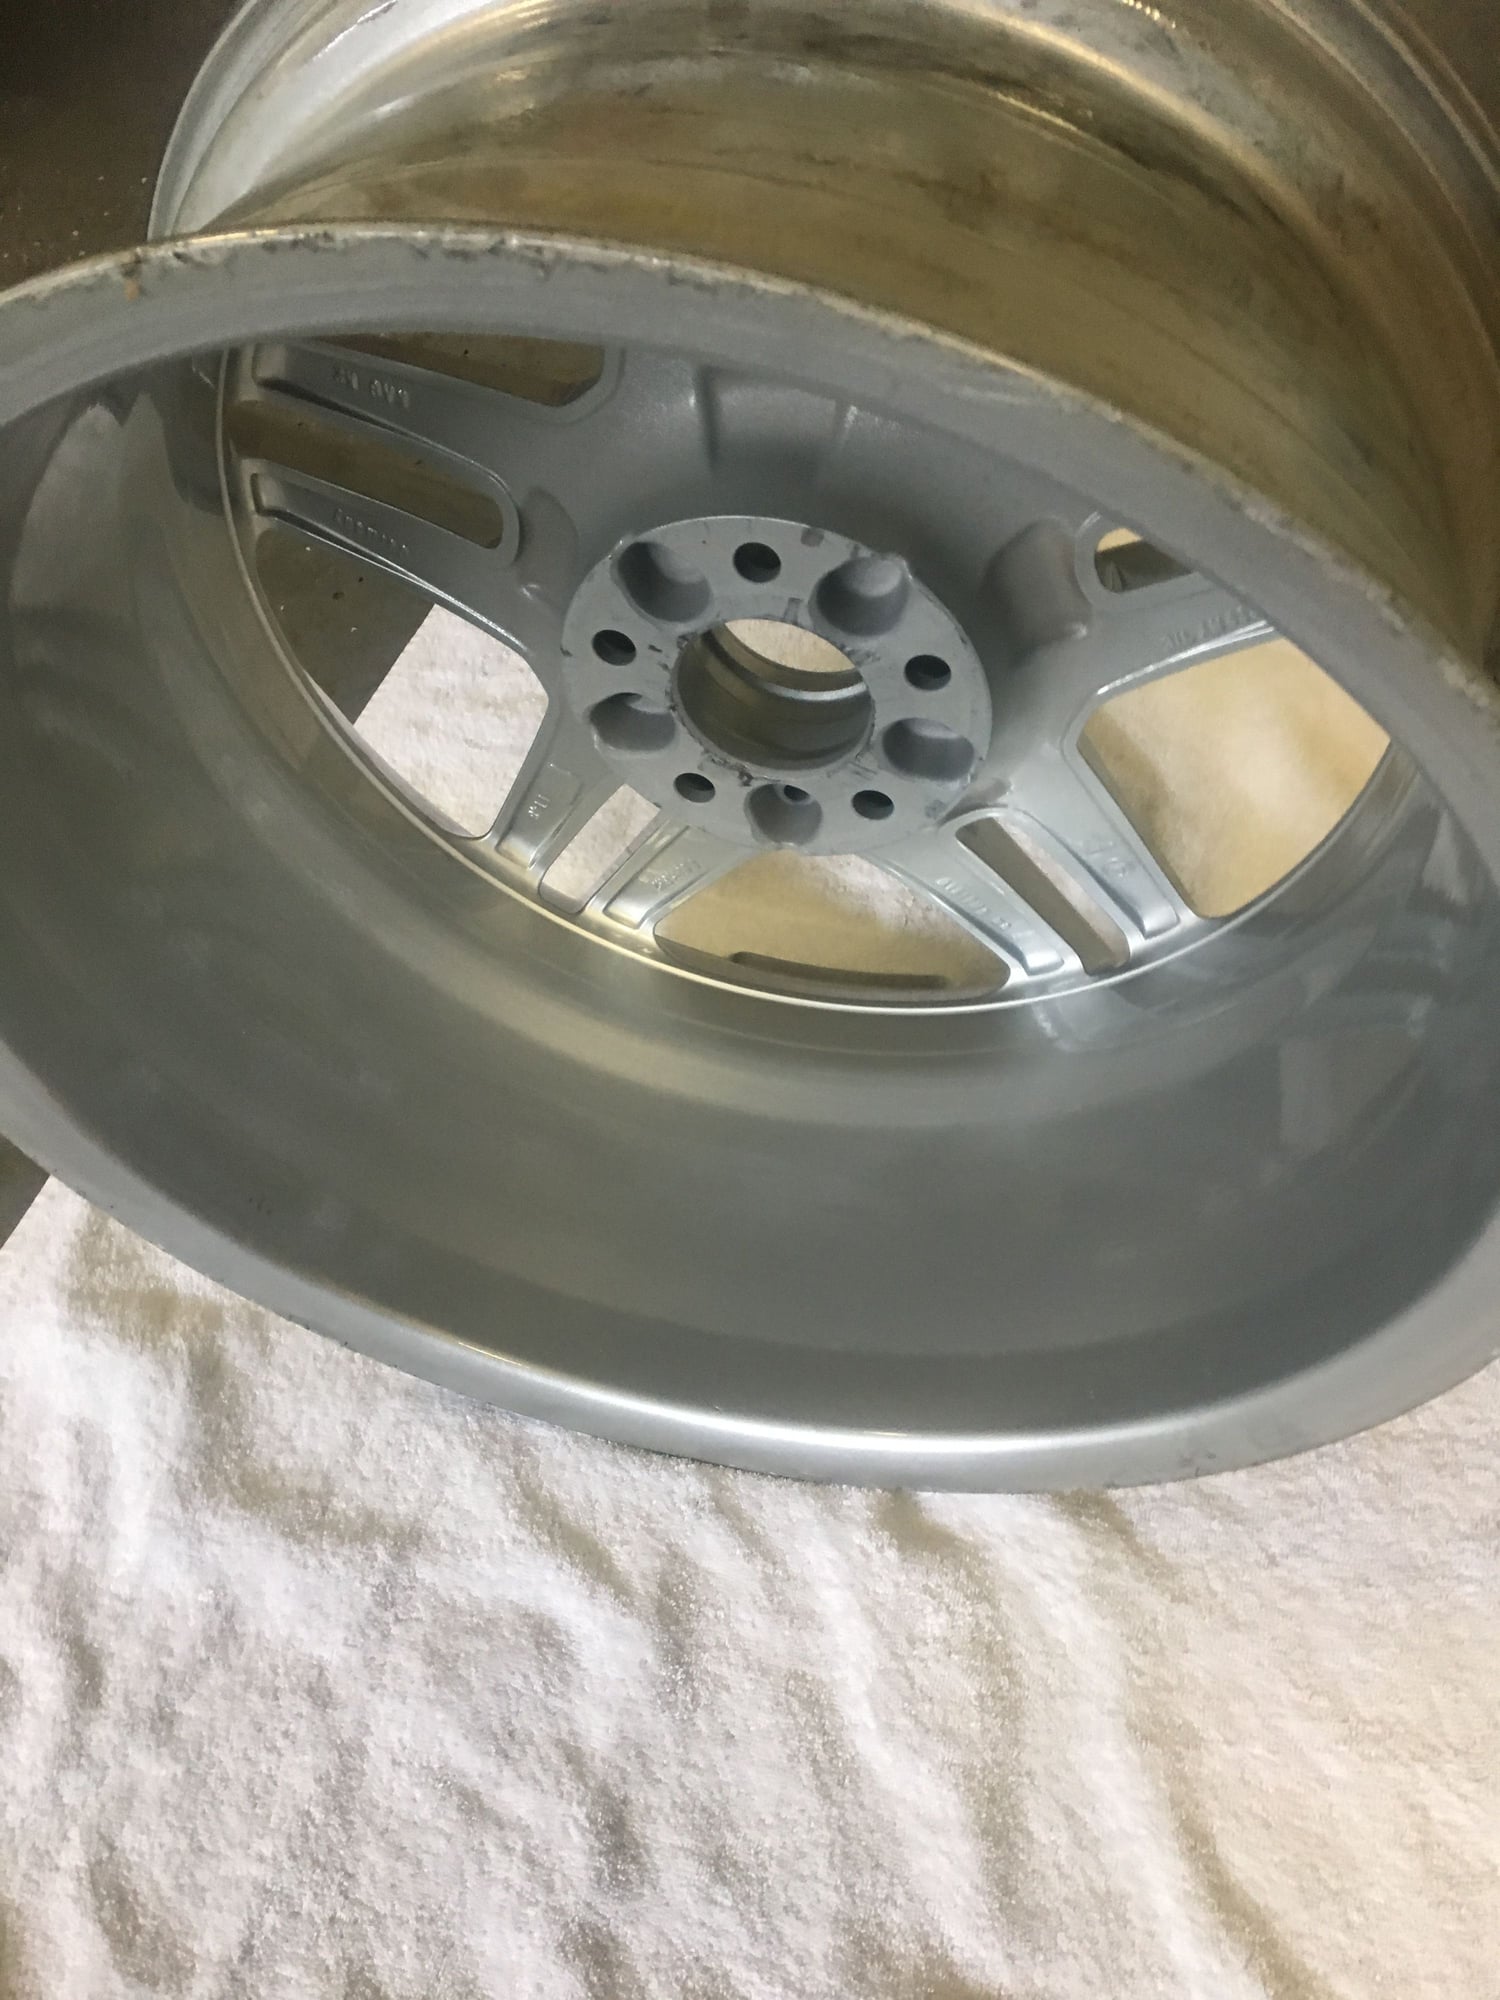 Wheels and Tires/Axles - E550, e350 18 inch front wheel - Used - 2010 to 2014 Mercedes-Benz E350 - 2010 to 2014 Mercedes-Benz E550 - Oakland, CA 94619, United States